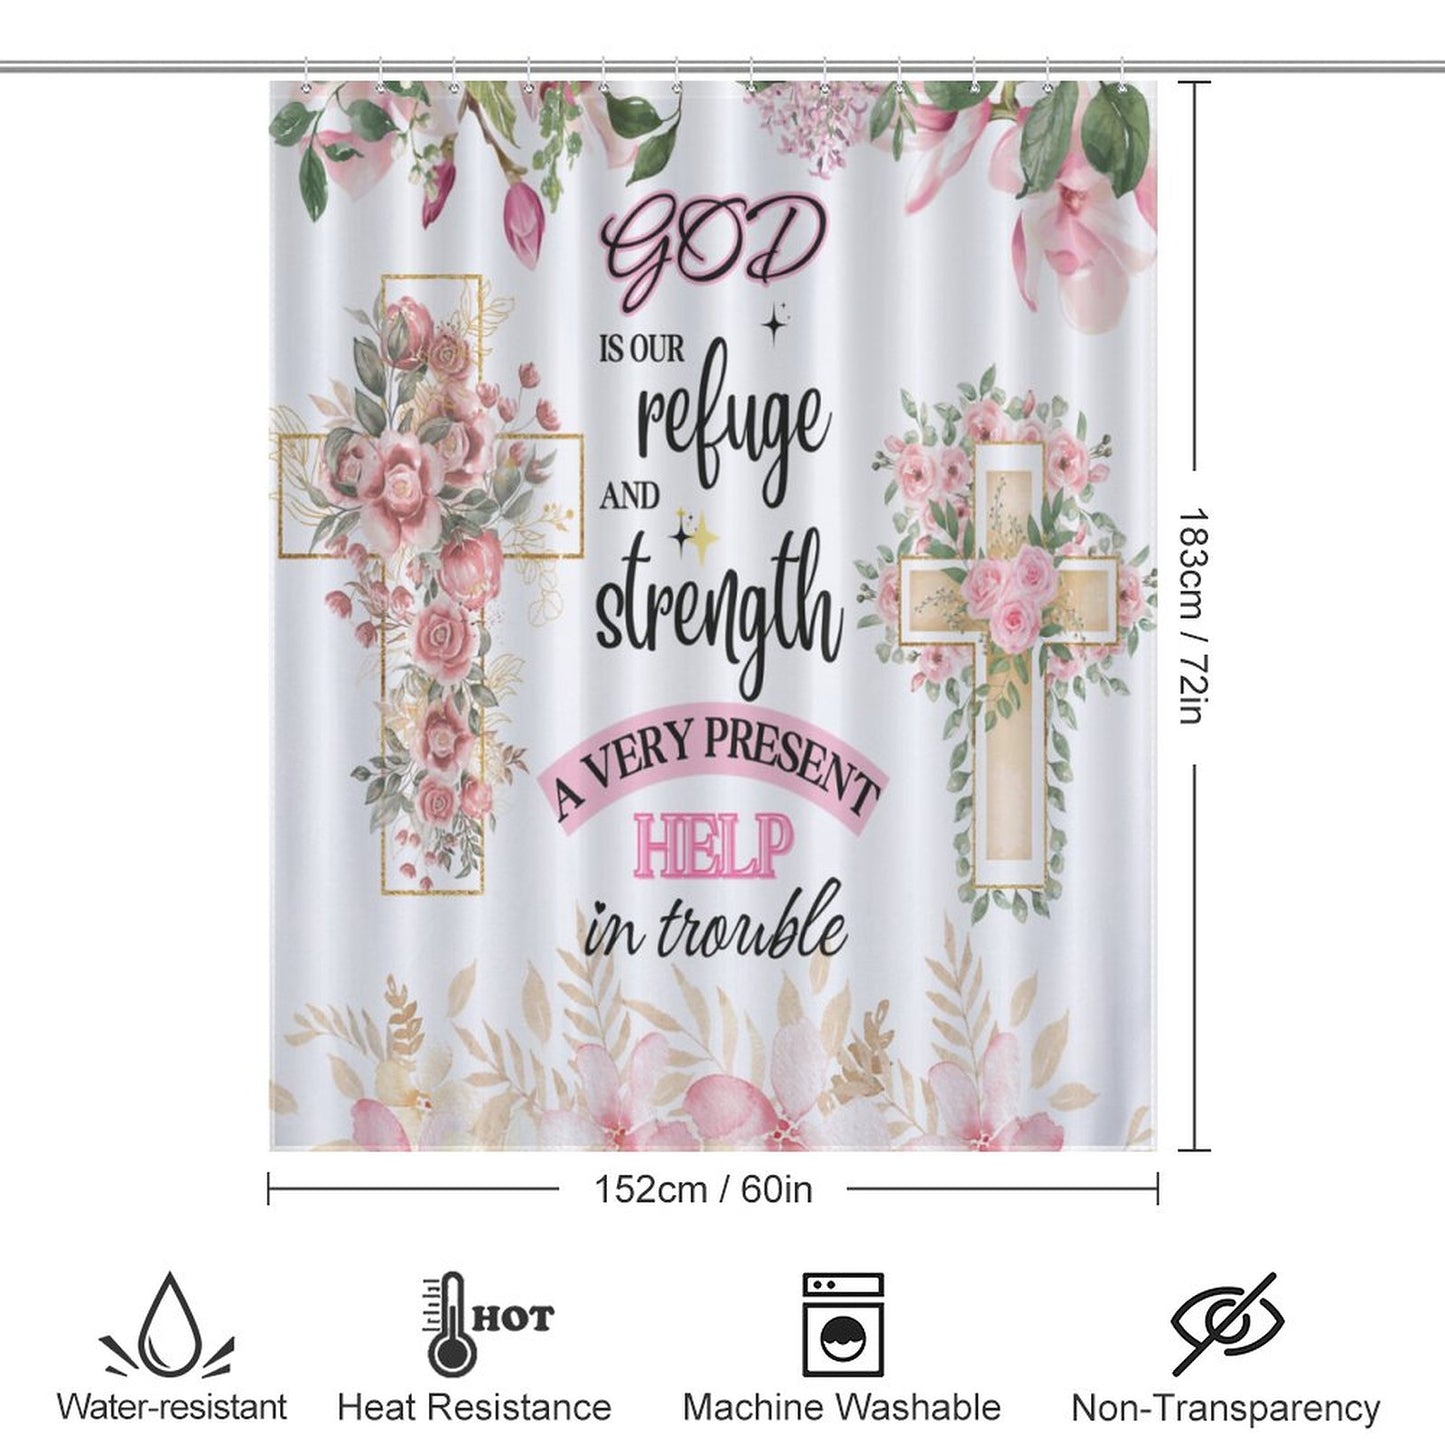 God Is Our Refuge And Strength A Very Present Help Christian Shower Curtain-66x72Inch (168x183cm) SALE-Personal Design